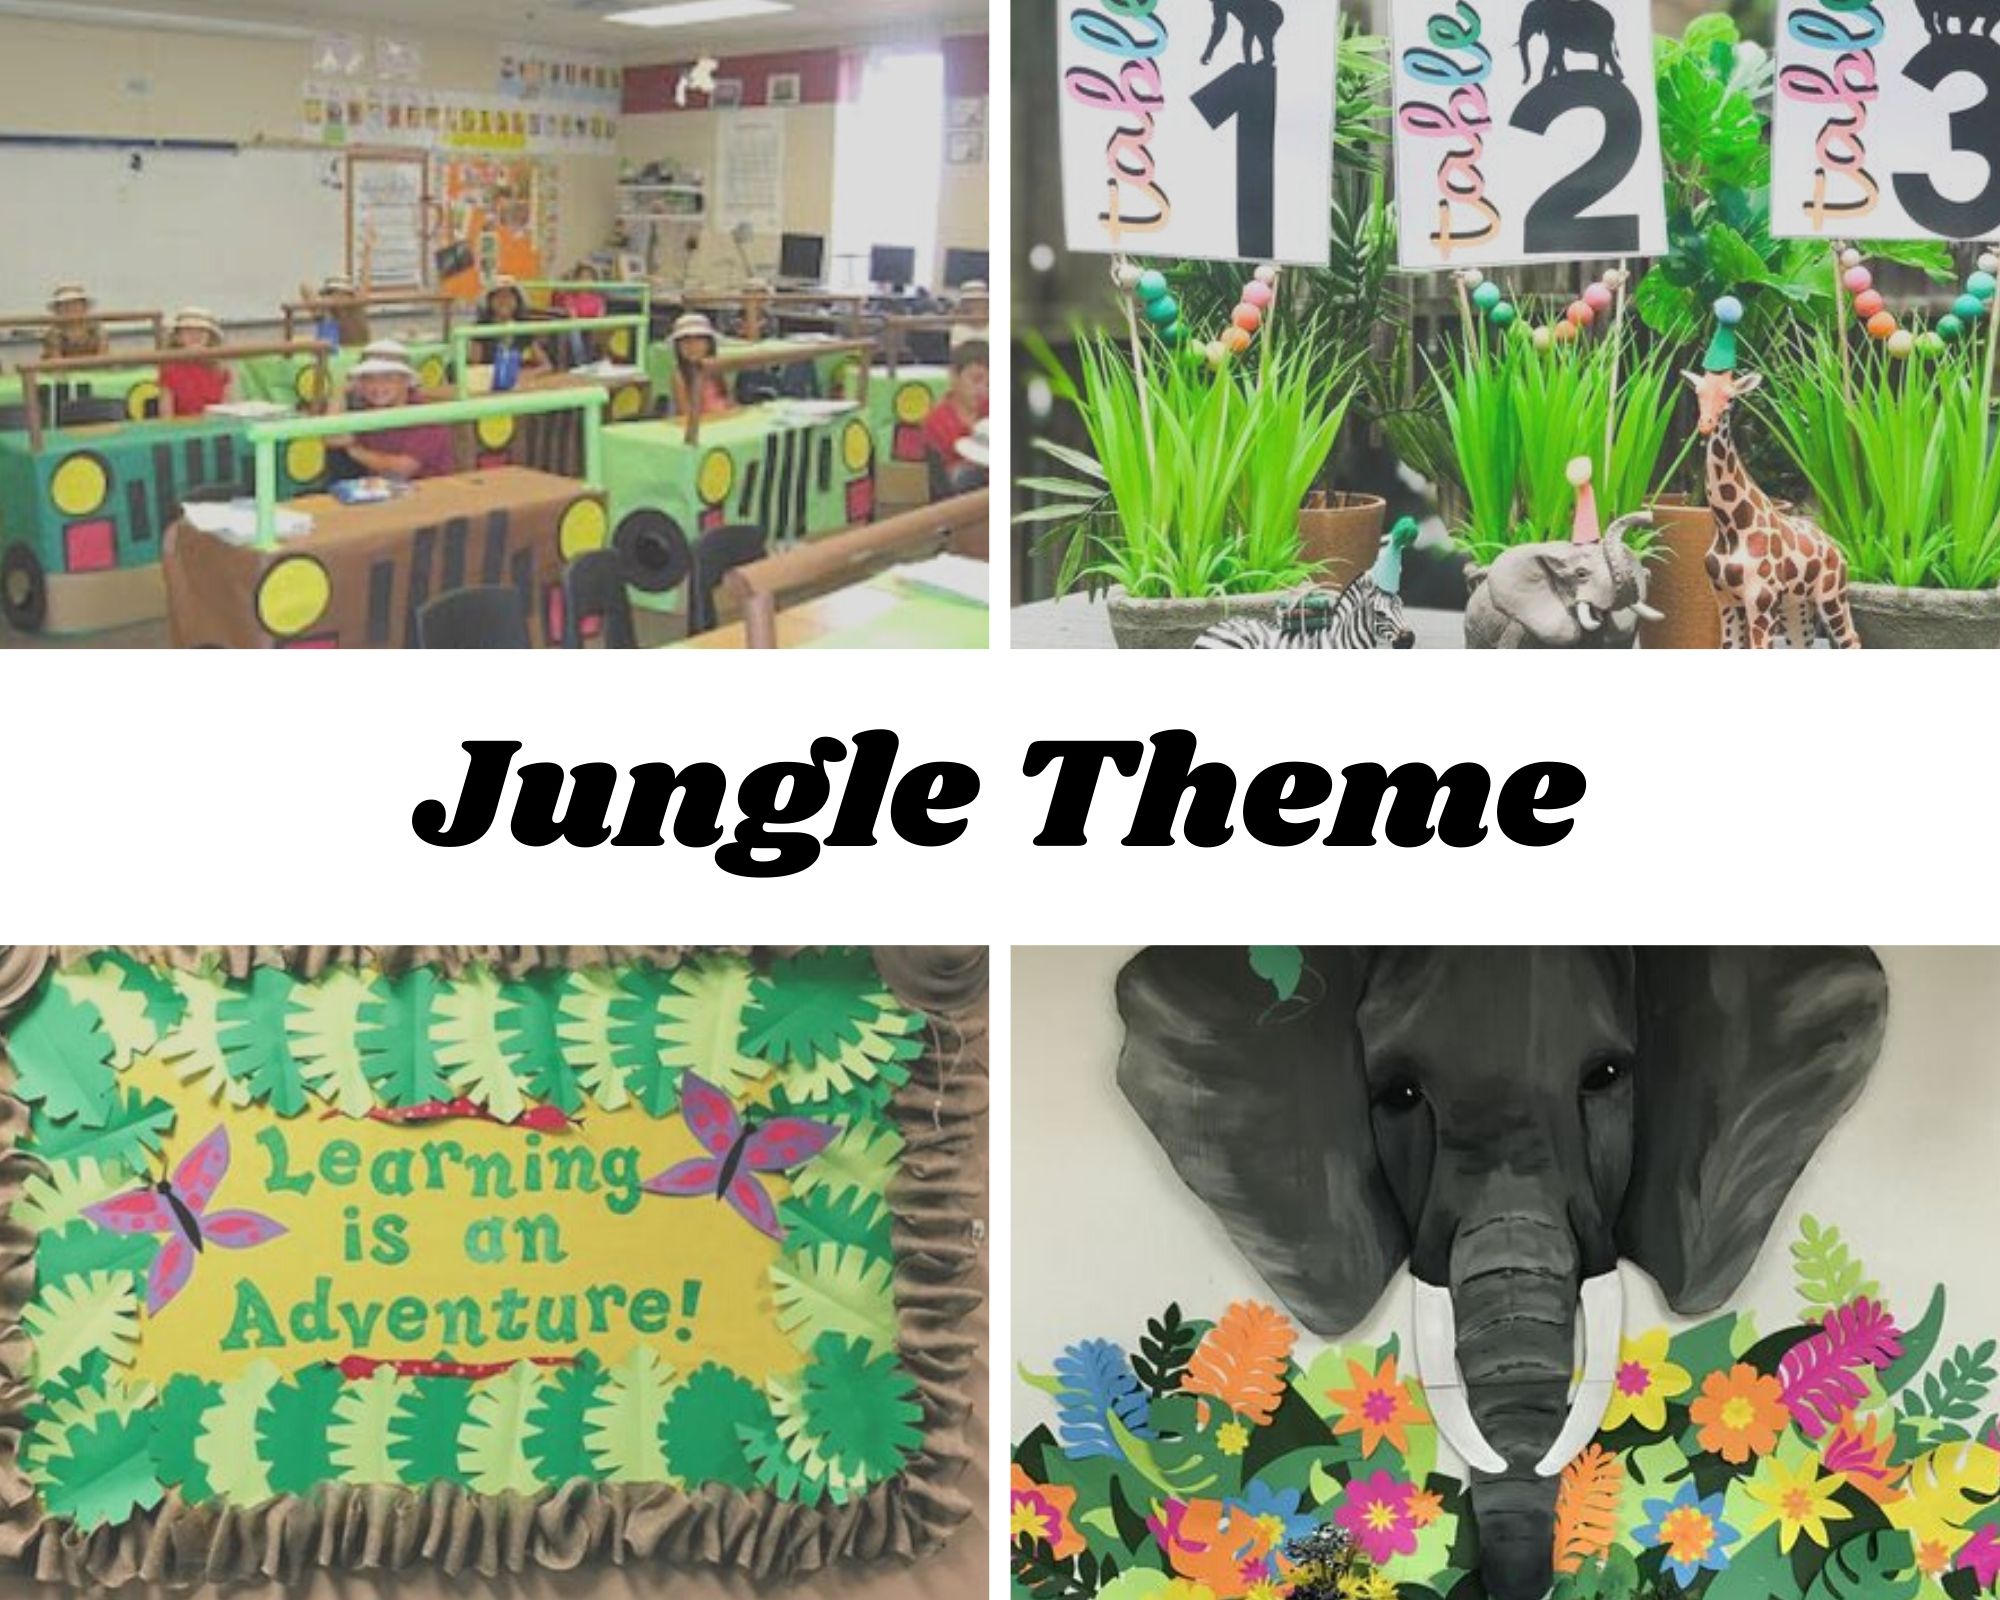 39 Versatile Themes To Enrich Your Classroom Teaching Expertise